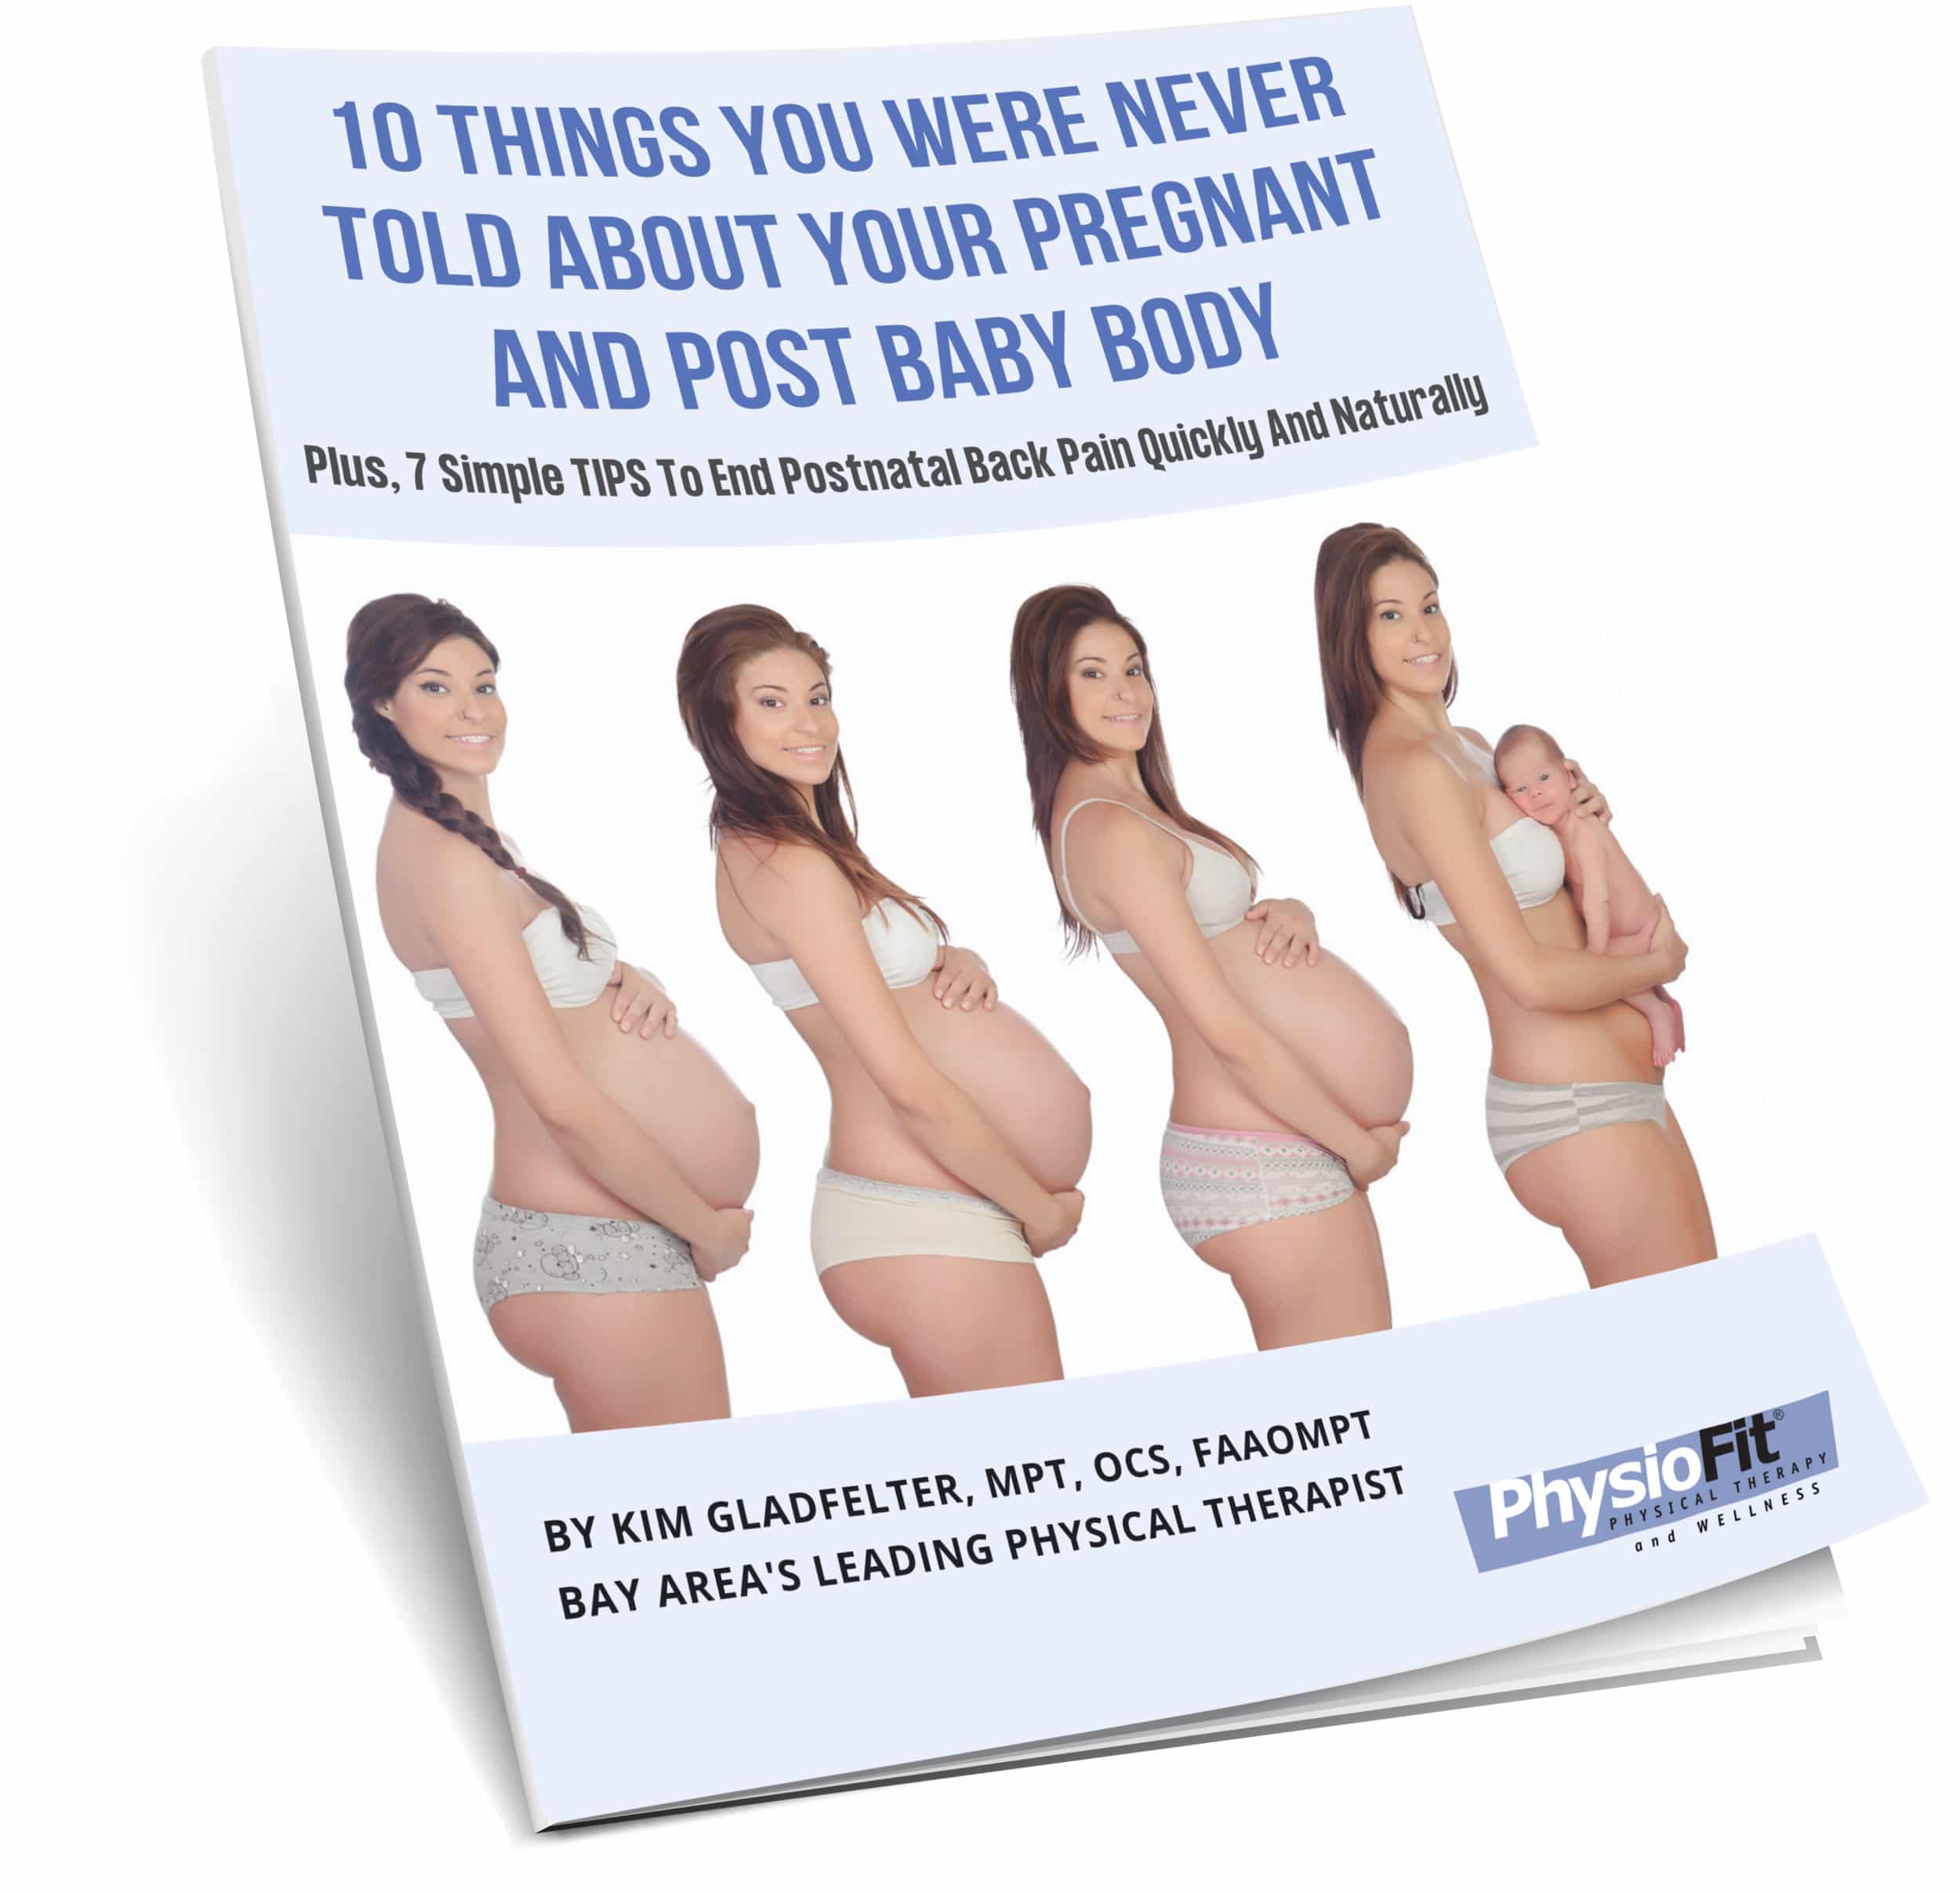 2021 10 Things You Were Never Told About Your Pregnant Post Baby Body new 1